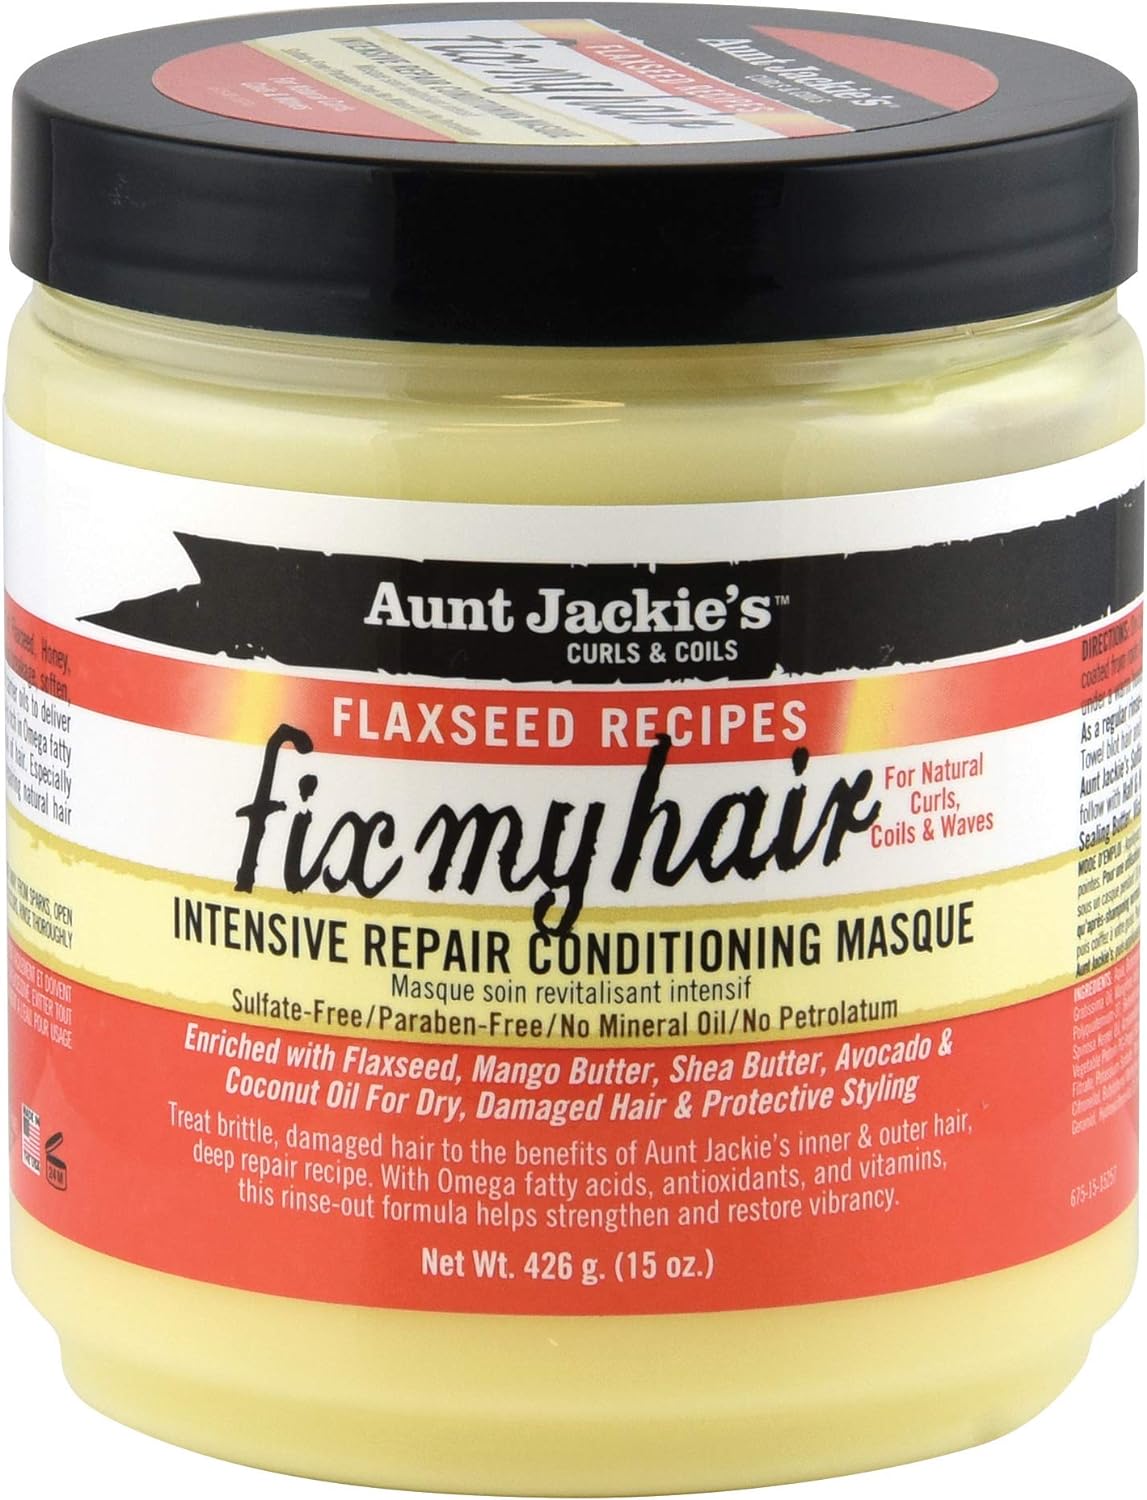 Aunt Jackie's Flaxseed Recipes Fix My Hair, Intensive Repair Conditioning Masque